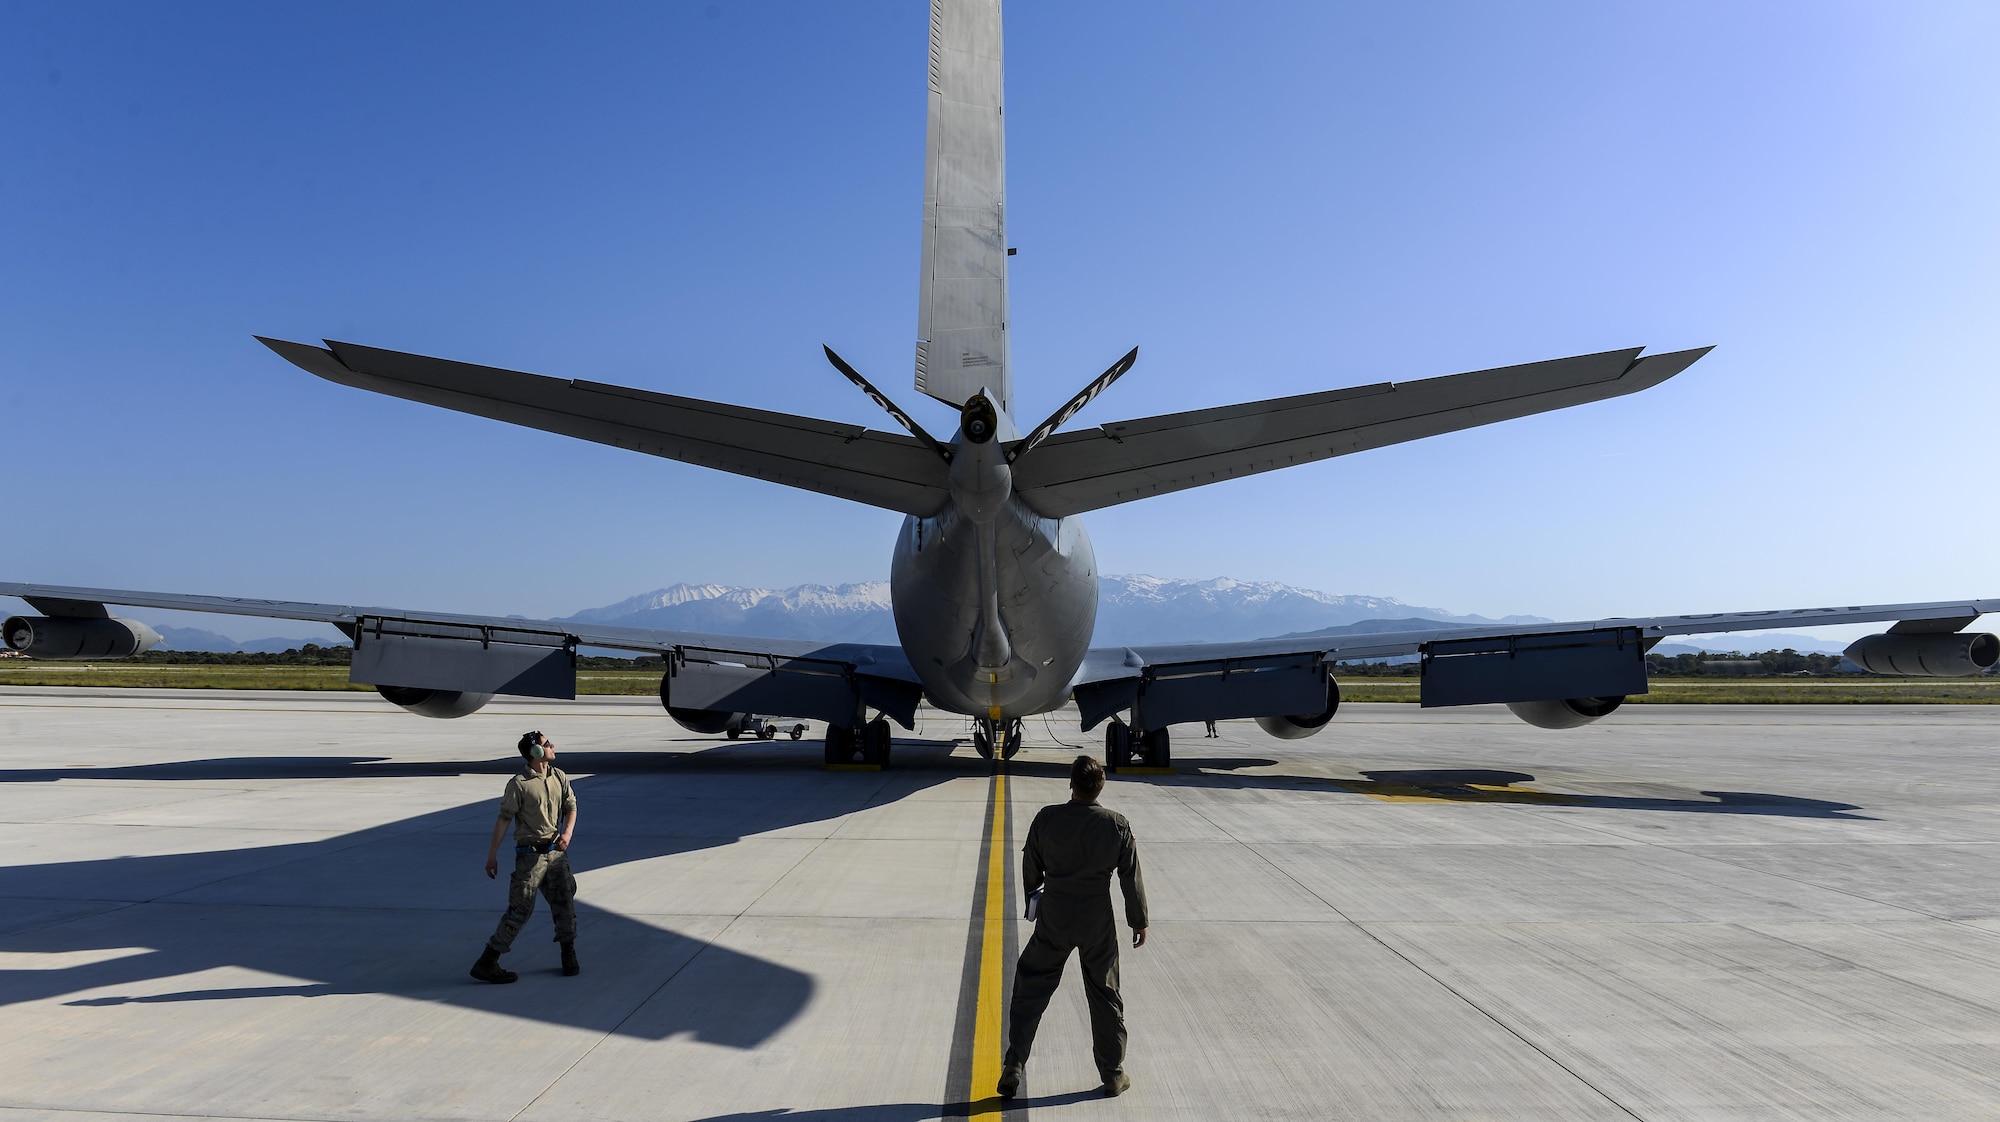 U.S. Air Force Capt. Bobby Stanford, 351st Air Refueling Squadron mission commander, and U.S. Air Force Staff Sgt. Joseph Flores, 100th Aircraft Maintenance Squadron flying crew chief, inspect a KC-135 Stratotanker May 3, 2017, at Naval Support Activity Souda Bay, Greece. As the mission commander, Stanford was in charge of two other aircraft during the refueling mission. (U.S. Air Force photo by Staff Sgt. Micaiah Anthony)